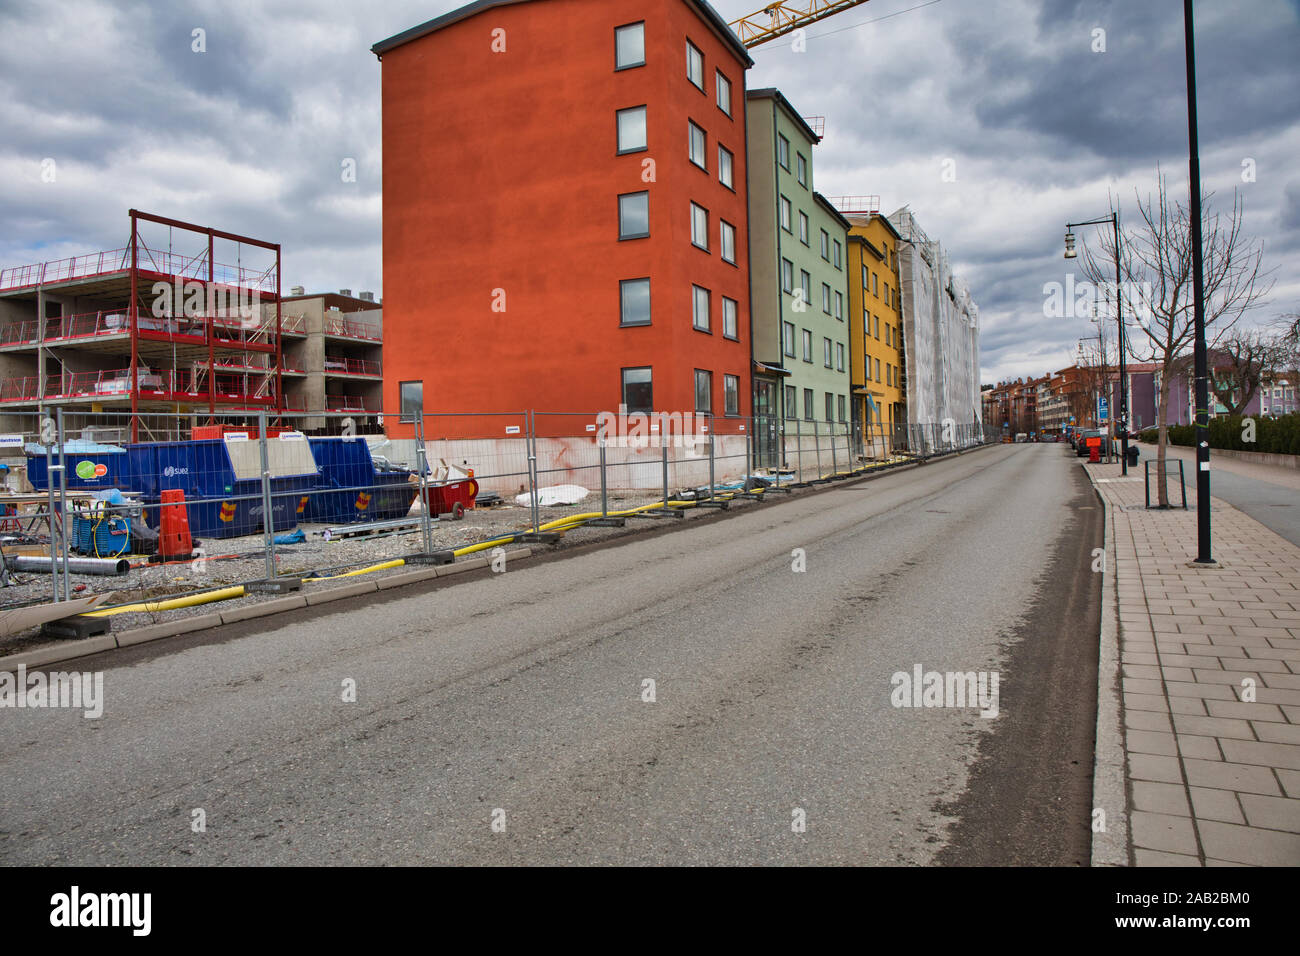 Newly constructed apartment blocks housing in the Stockholm suburb of Upplands Vasby, Stockholm, Sweden Stock Photo